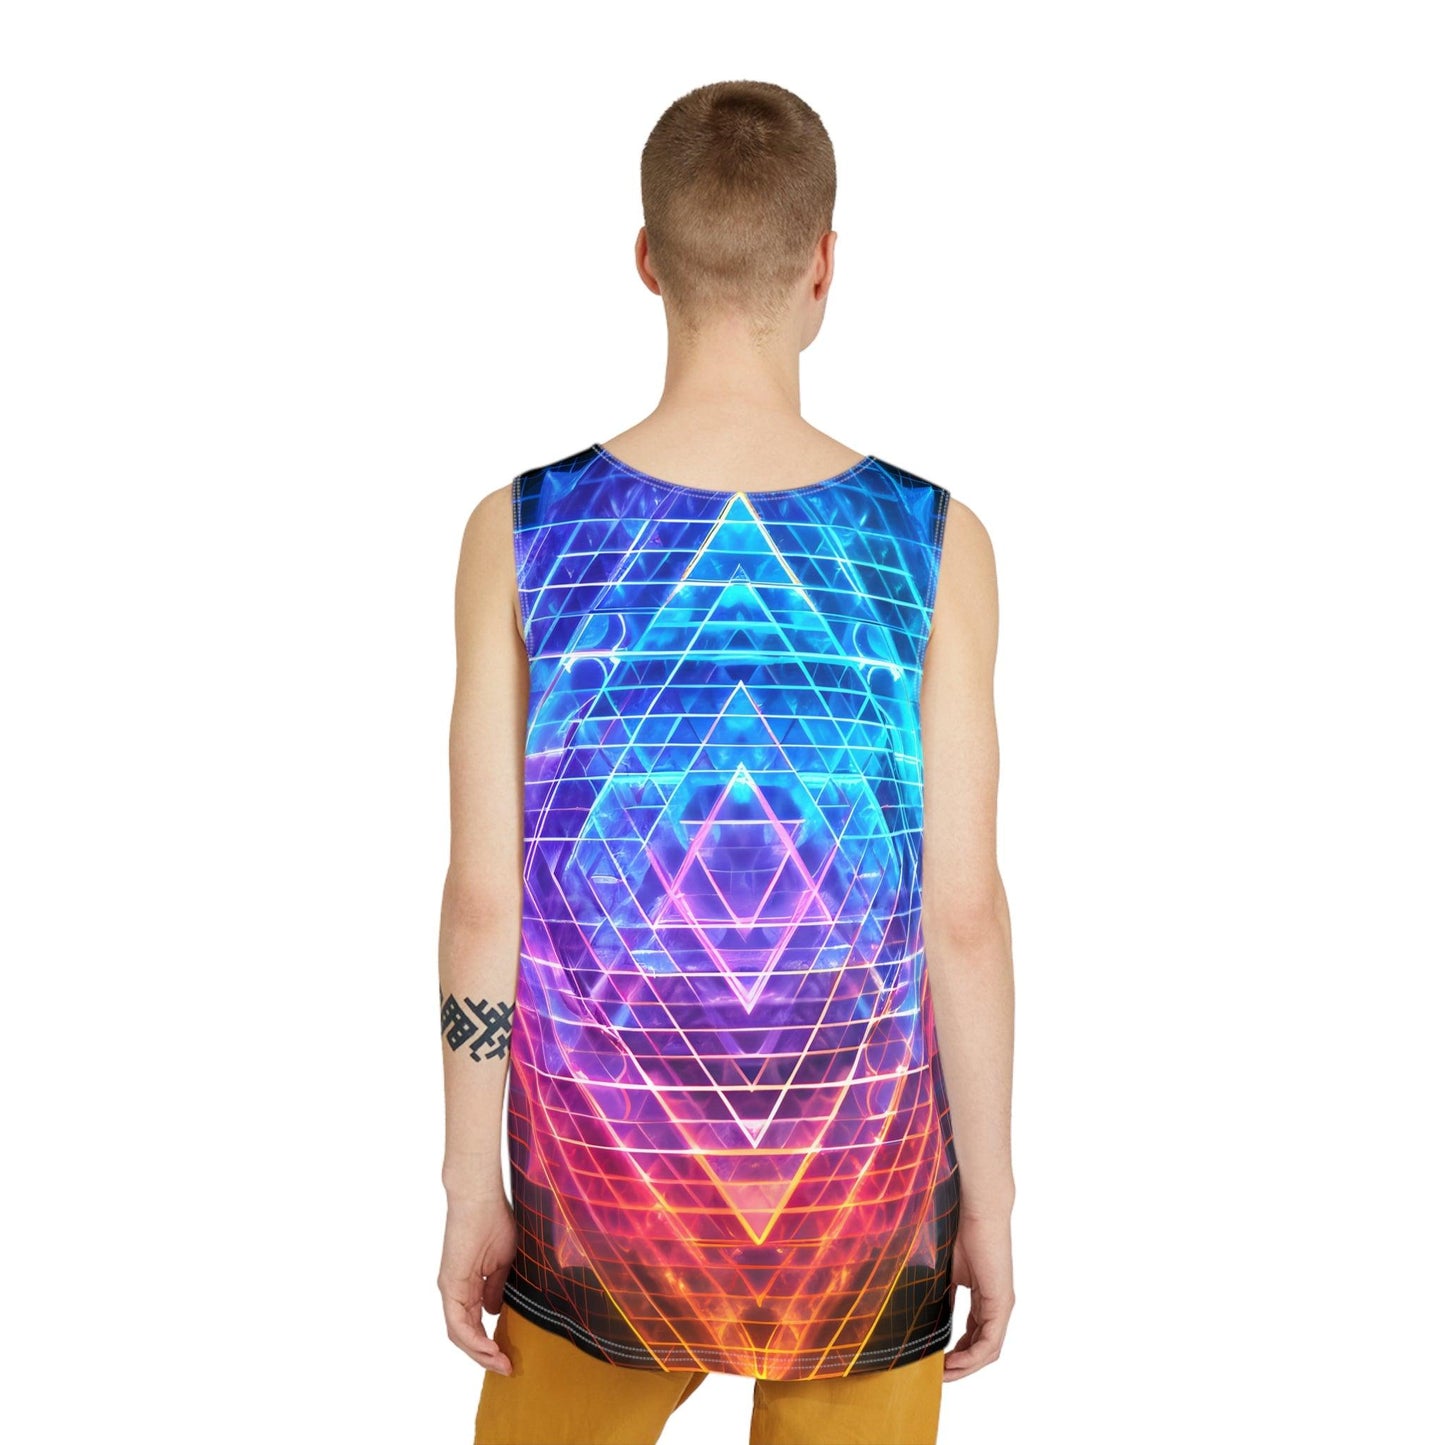 Sri Yantra 3D v2.1 Sacred Geometry Octane Colorful Symmetrical Sublimation Tank Top for Him - Stylish Comfort for Festival Street Activewear and More - Alchemystics.org